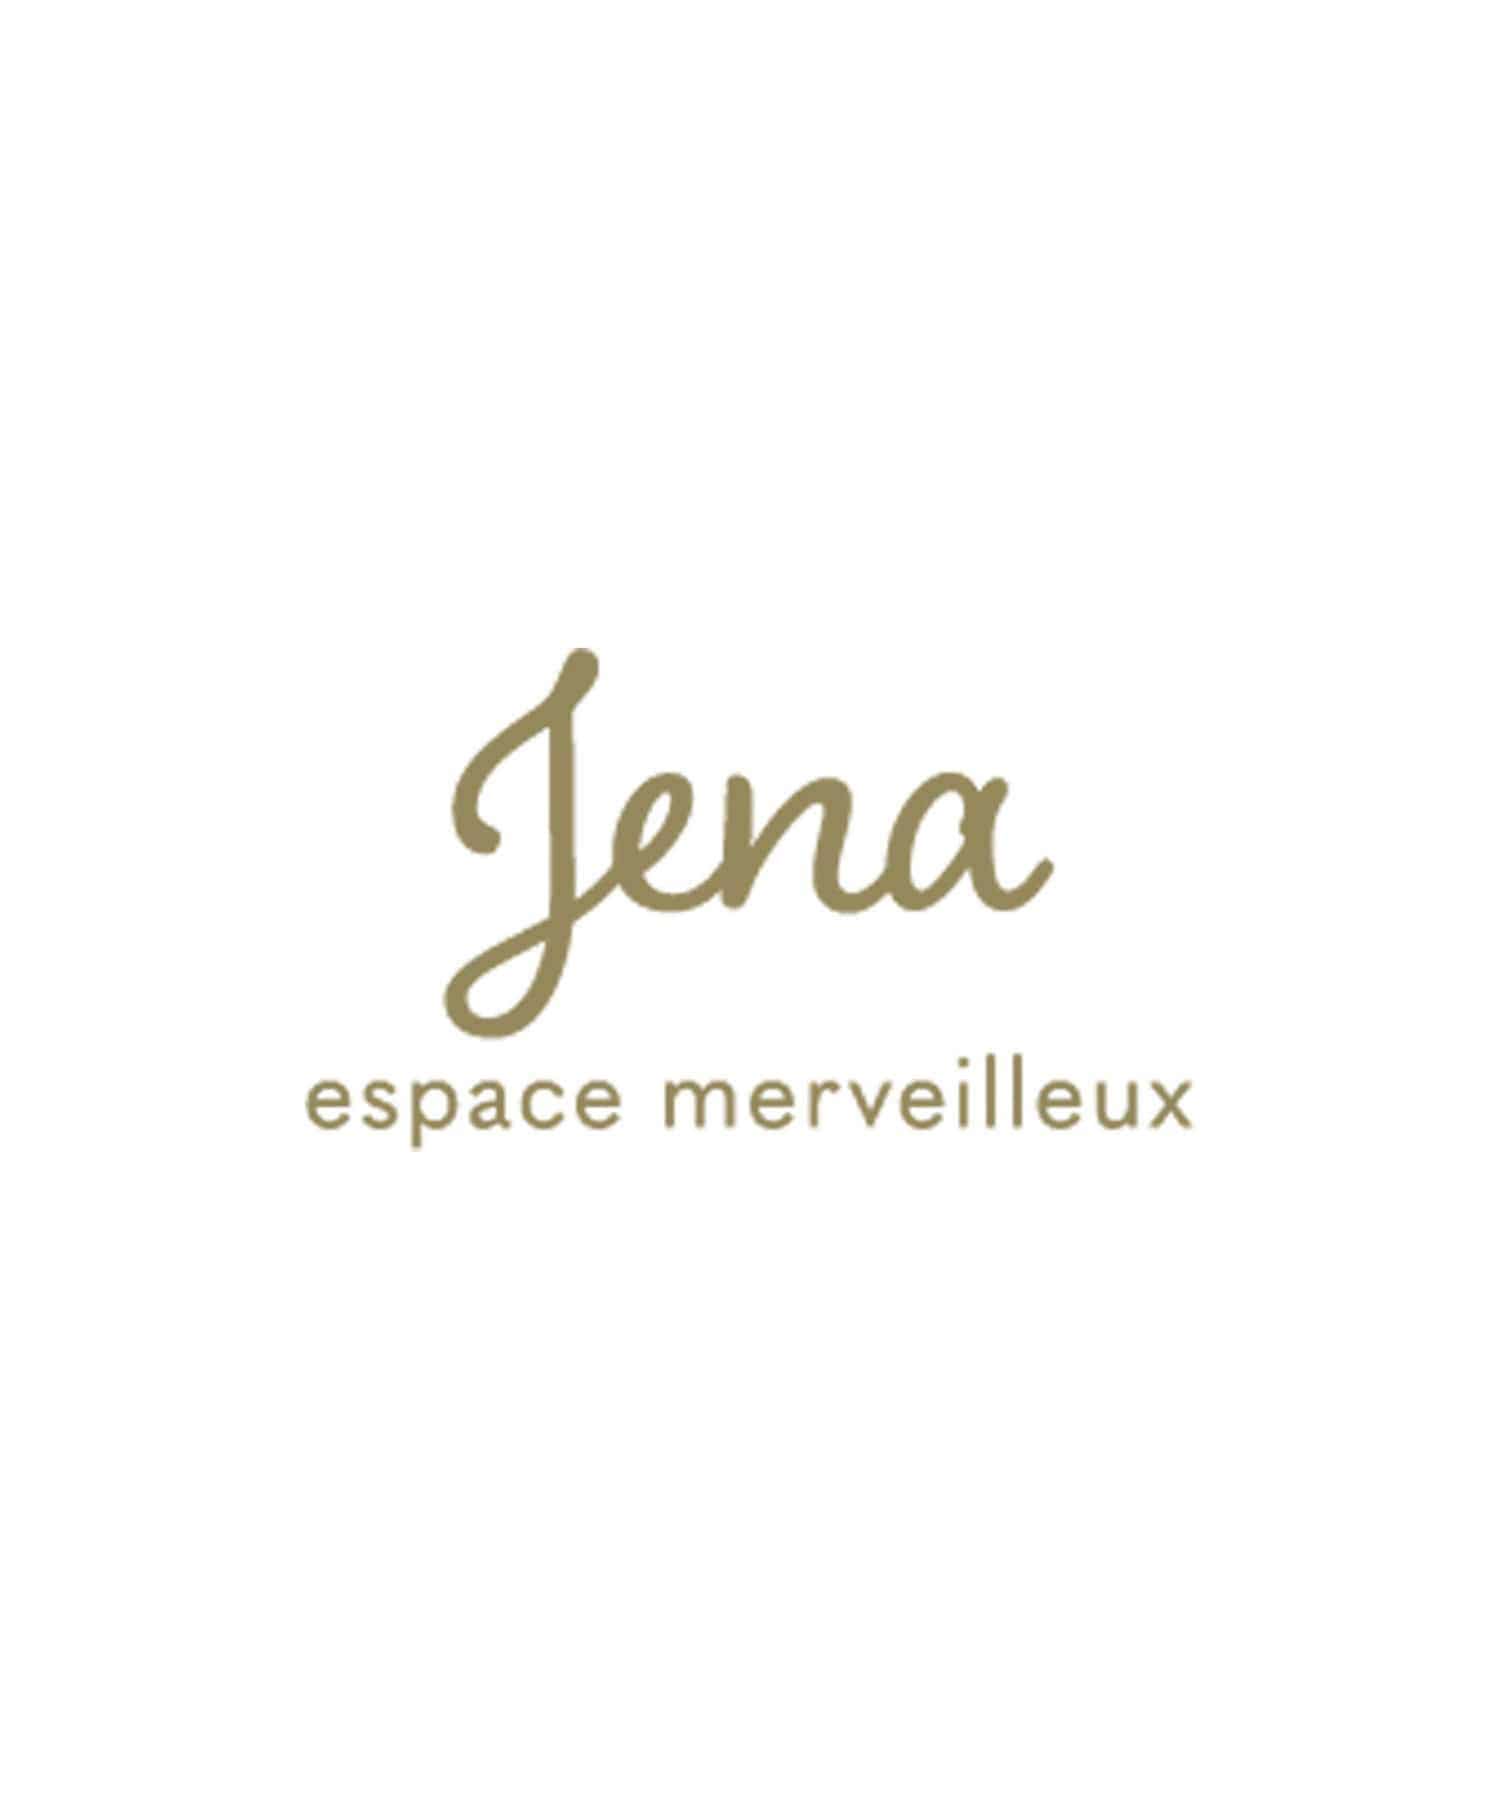 Jena　espace merveilleux(ジェナ　エスパスメルヴェイユ)